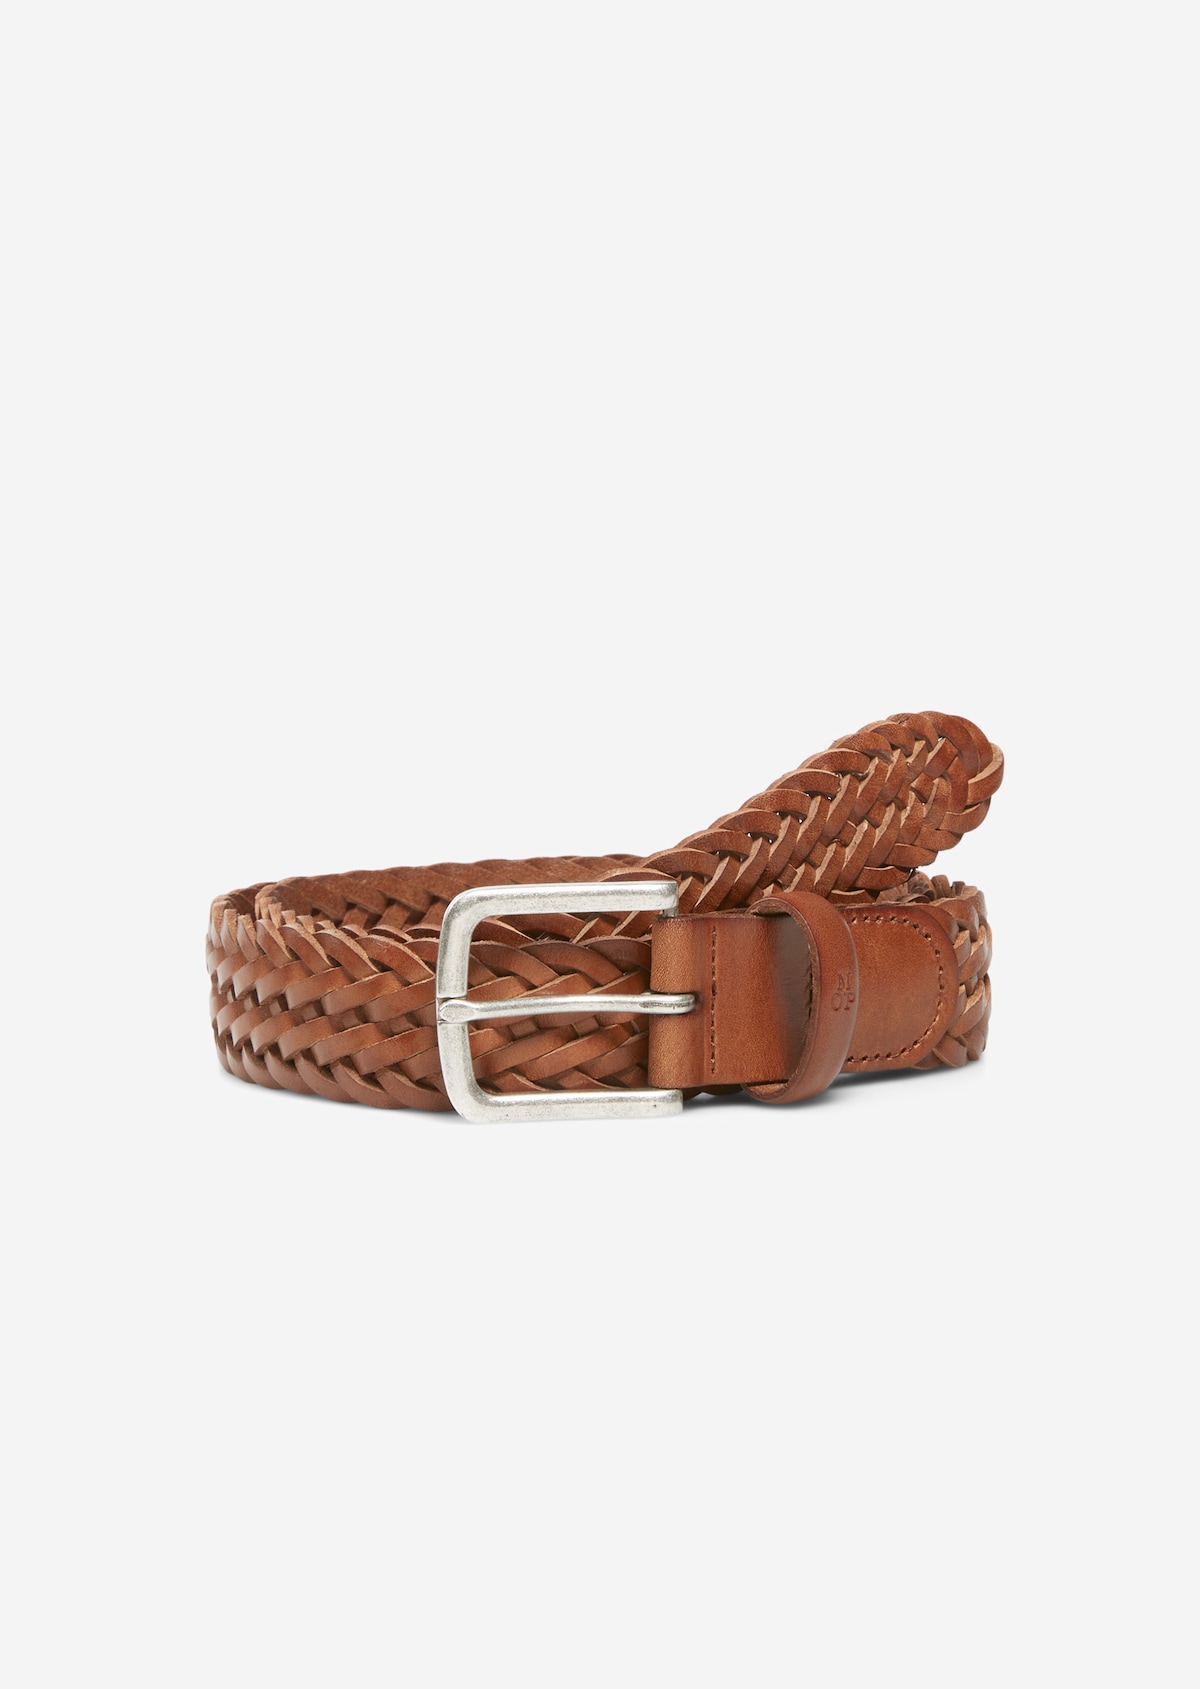 Braided belt made of fine cowhide leather - brown | Belts | MARC O'POLO